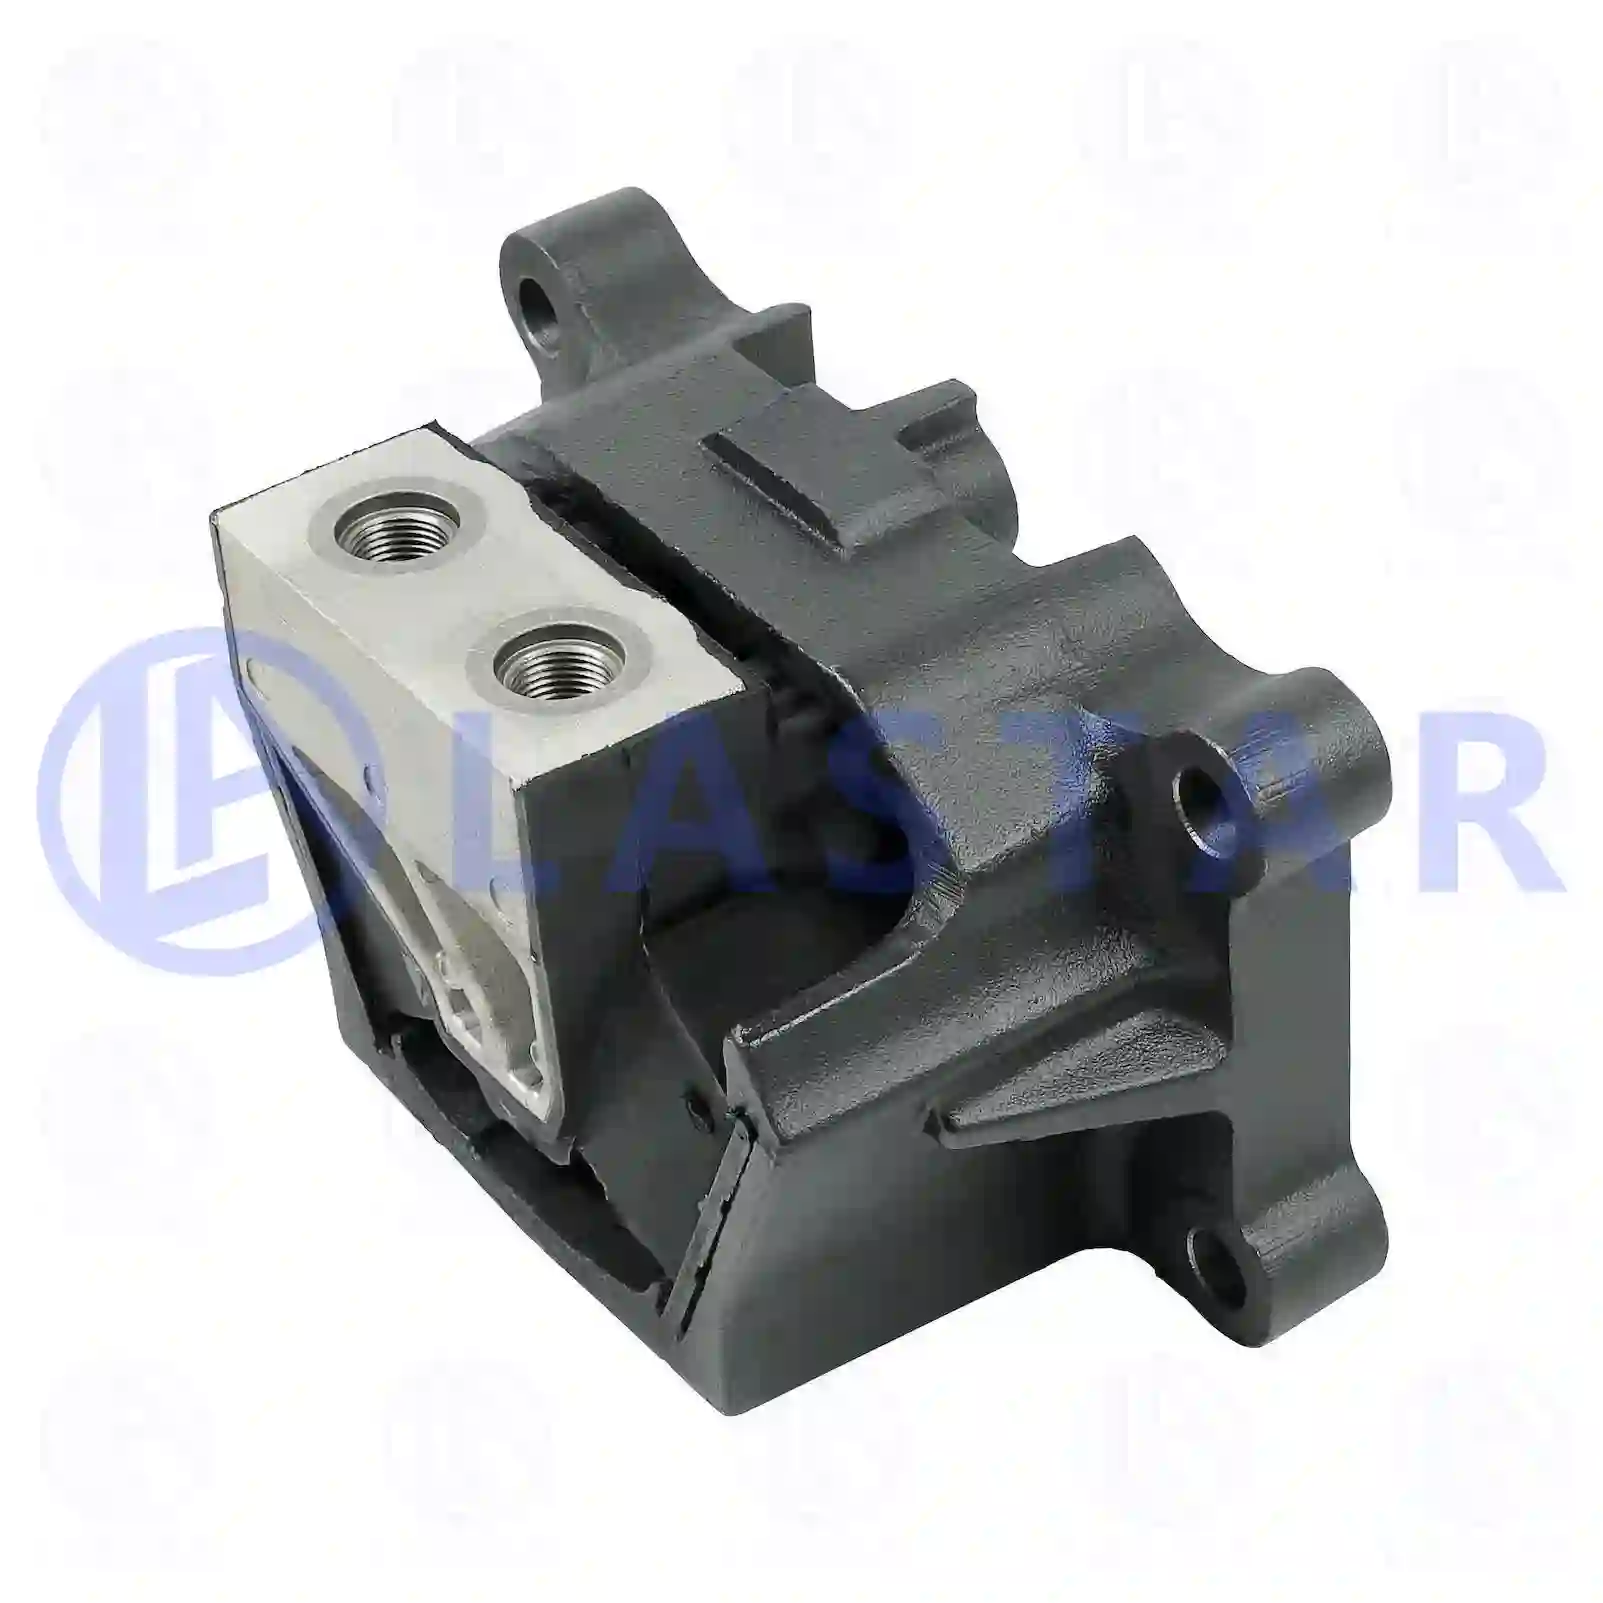 Engine mounting, 77702429, 9412418313, , , , ||  77702429 Lastar Spare Part | Truck Spare Parts, Auotomotive Spare Parts Engine mounting, 77702429, 9412418313, , , , ||  77702429 Lastar Spare Part | Truck Spare Parts, Auotomotive Spare Parts